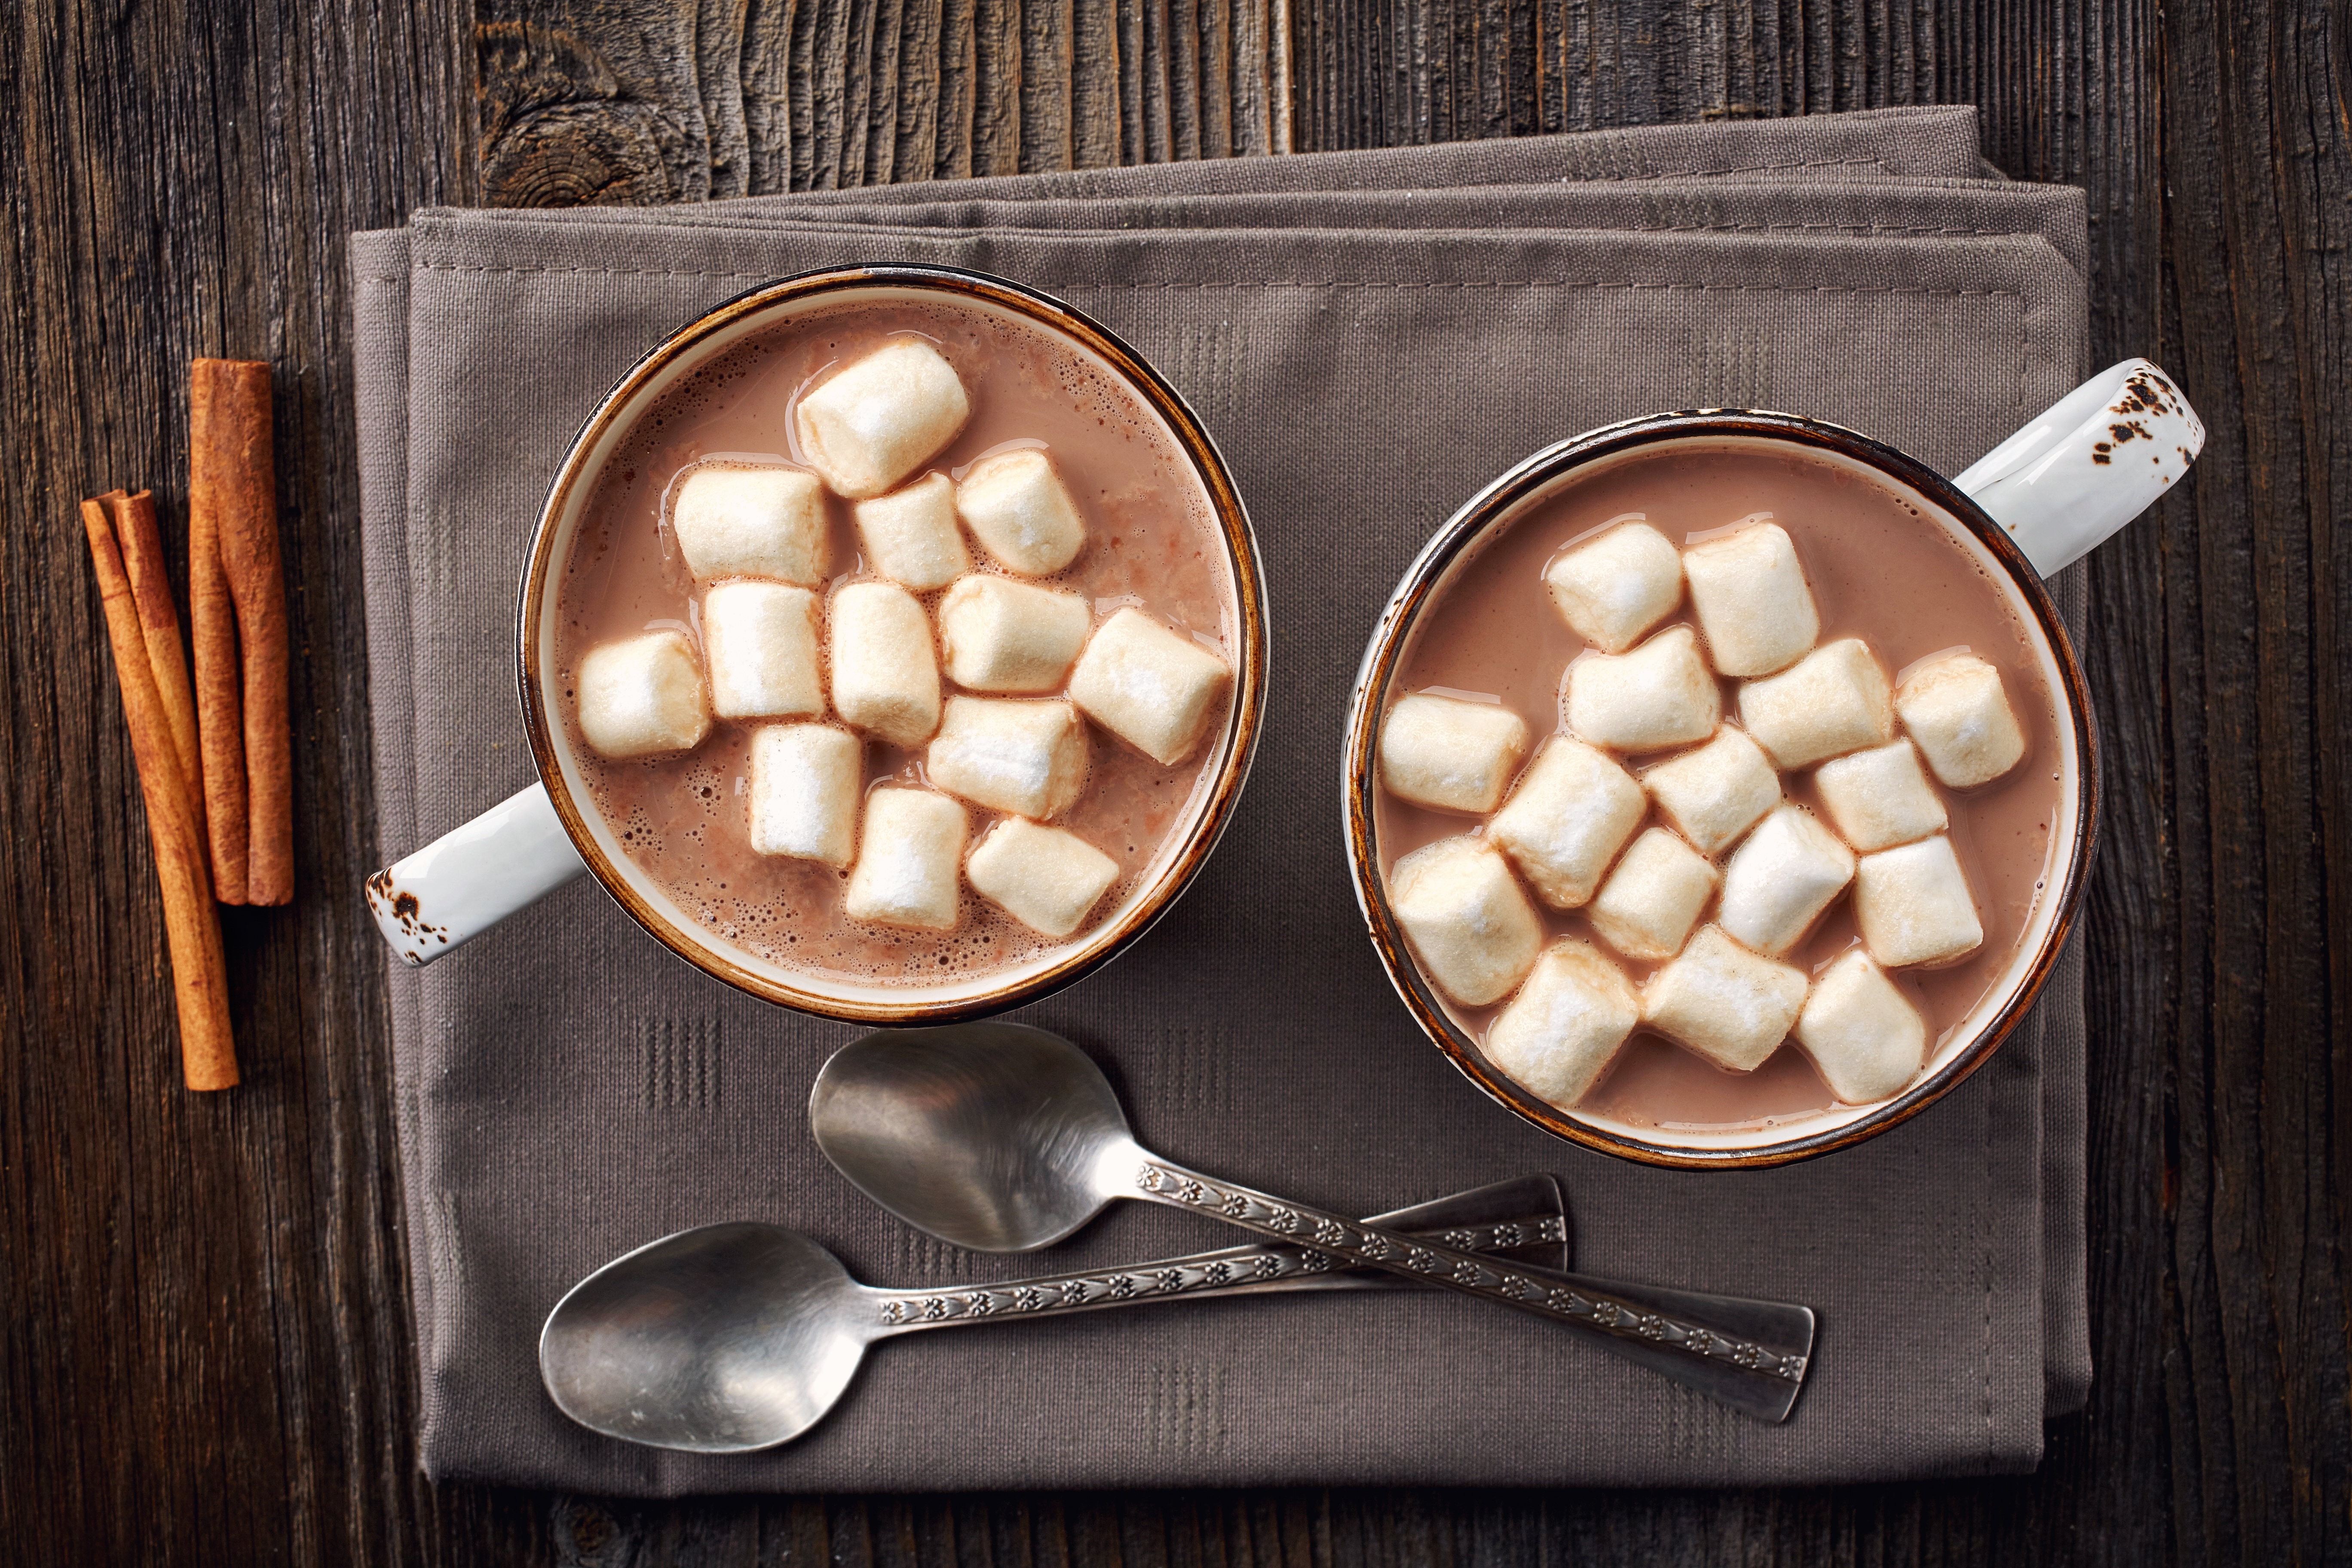 Hot Chocolate Cup Marshmallow 5472x3648